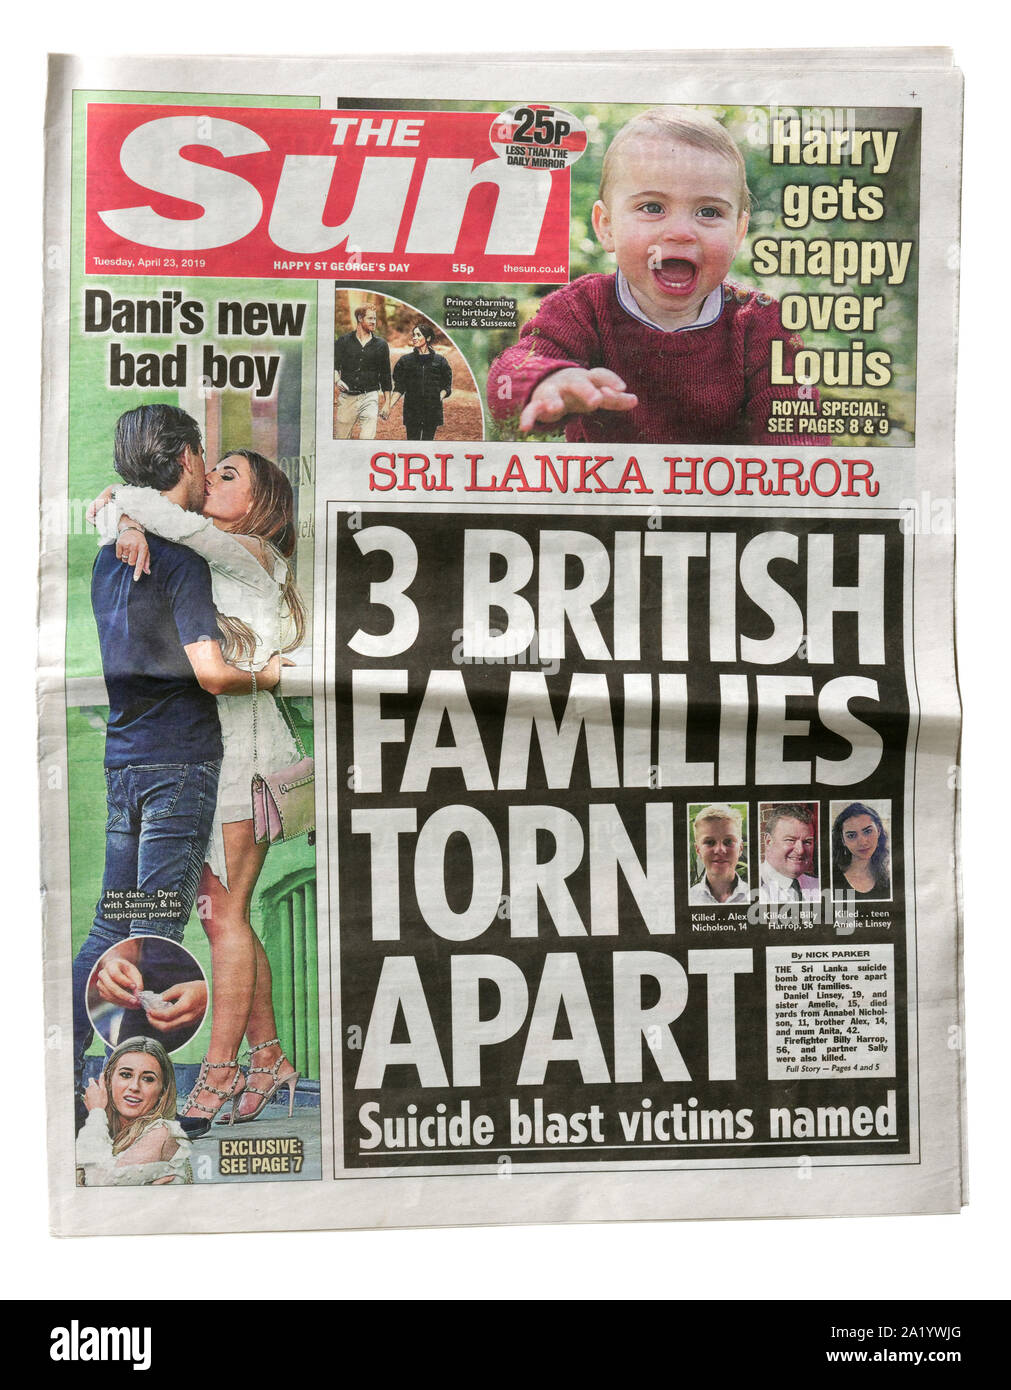 The front page of the The Sun from April 23 2019 with the headline Families Torn Apart, about the Easter bombings in Sri Lanka Stock Photo